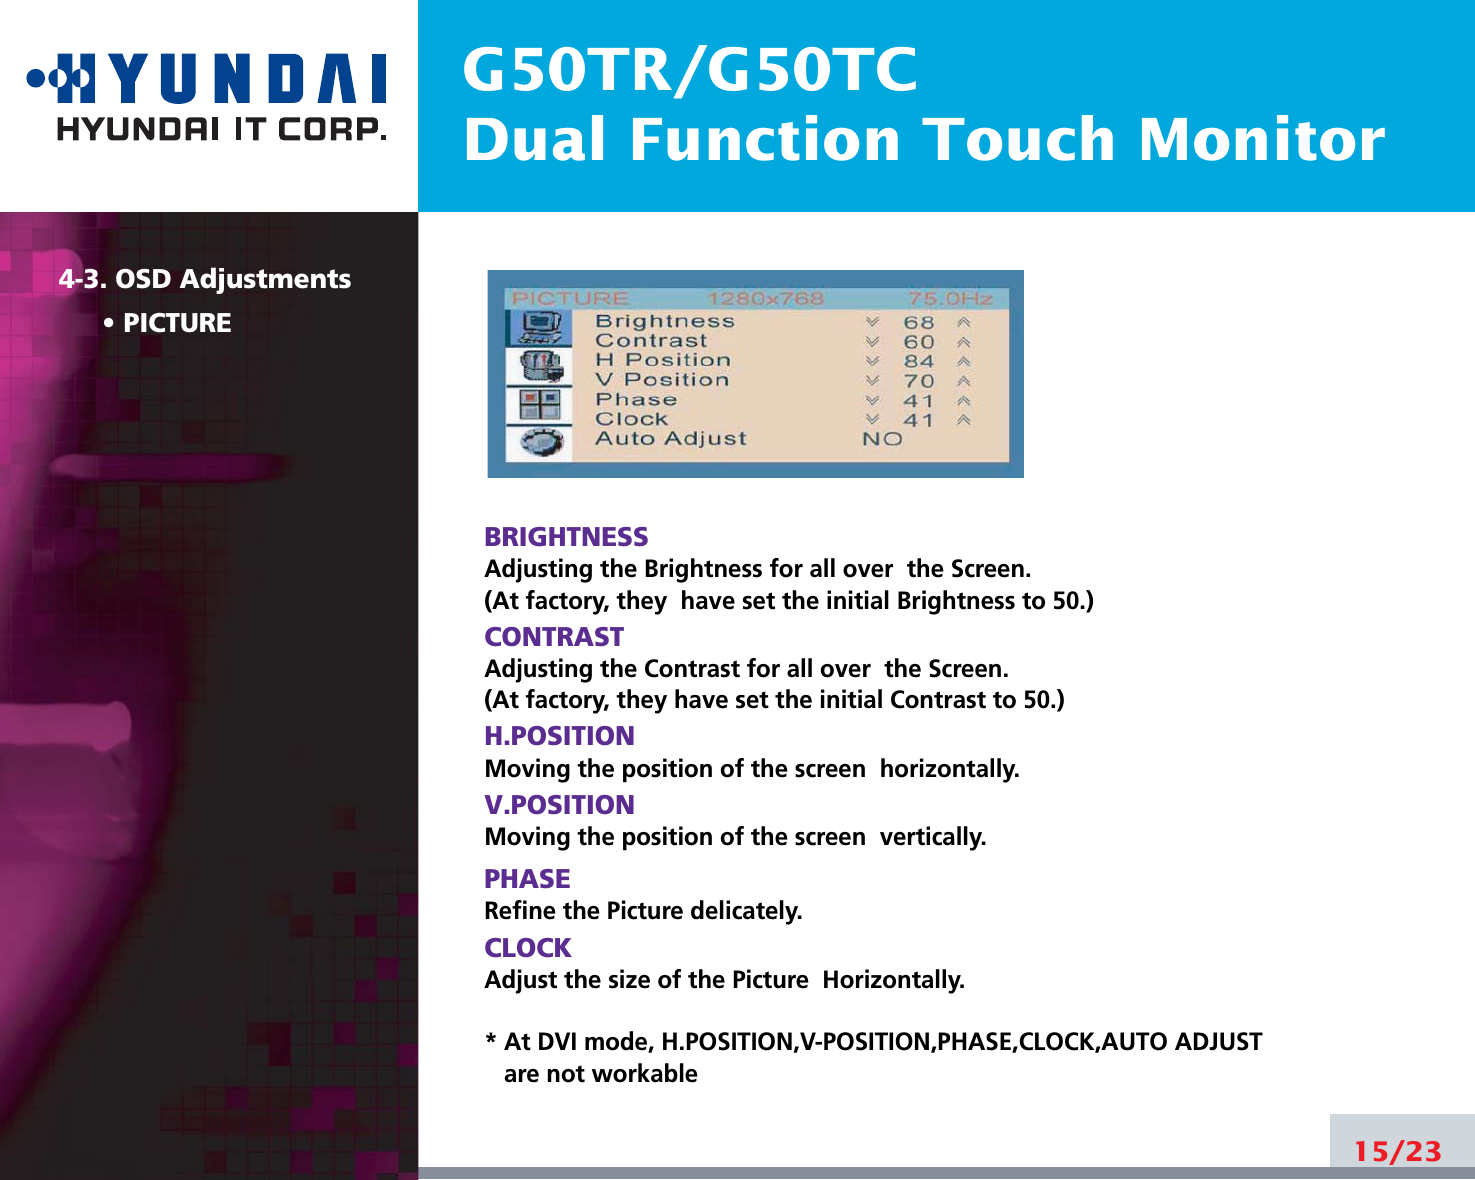 4-3. OSD AdjustmentsG50TR/G50TCDual Function Touch Monitor4-3. OSD AdjustmentsPICTUREBRIGHTNESSAdjusting the Brightness for all over  the Screen.(At factory, they  have set the initial Brightness to 50.)CONTRASTAdjusting the Contrast for all over  the Screen.(At factory, they have set the initial Contrast to 50.)H.POSITIONMoving the position of the screen  horizontally. V.POSITIONMoving the position of the screen  vertically. PHASERefine the Picture delicately. CLOCKAdjust the size of the Picture  Horizontally. * At DVI mode, H.POSITION,V-POSITION,PHASE,CLOCK,AUTO ADJUSTare not workable15/23